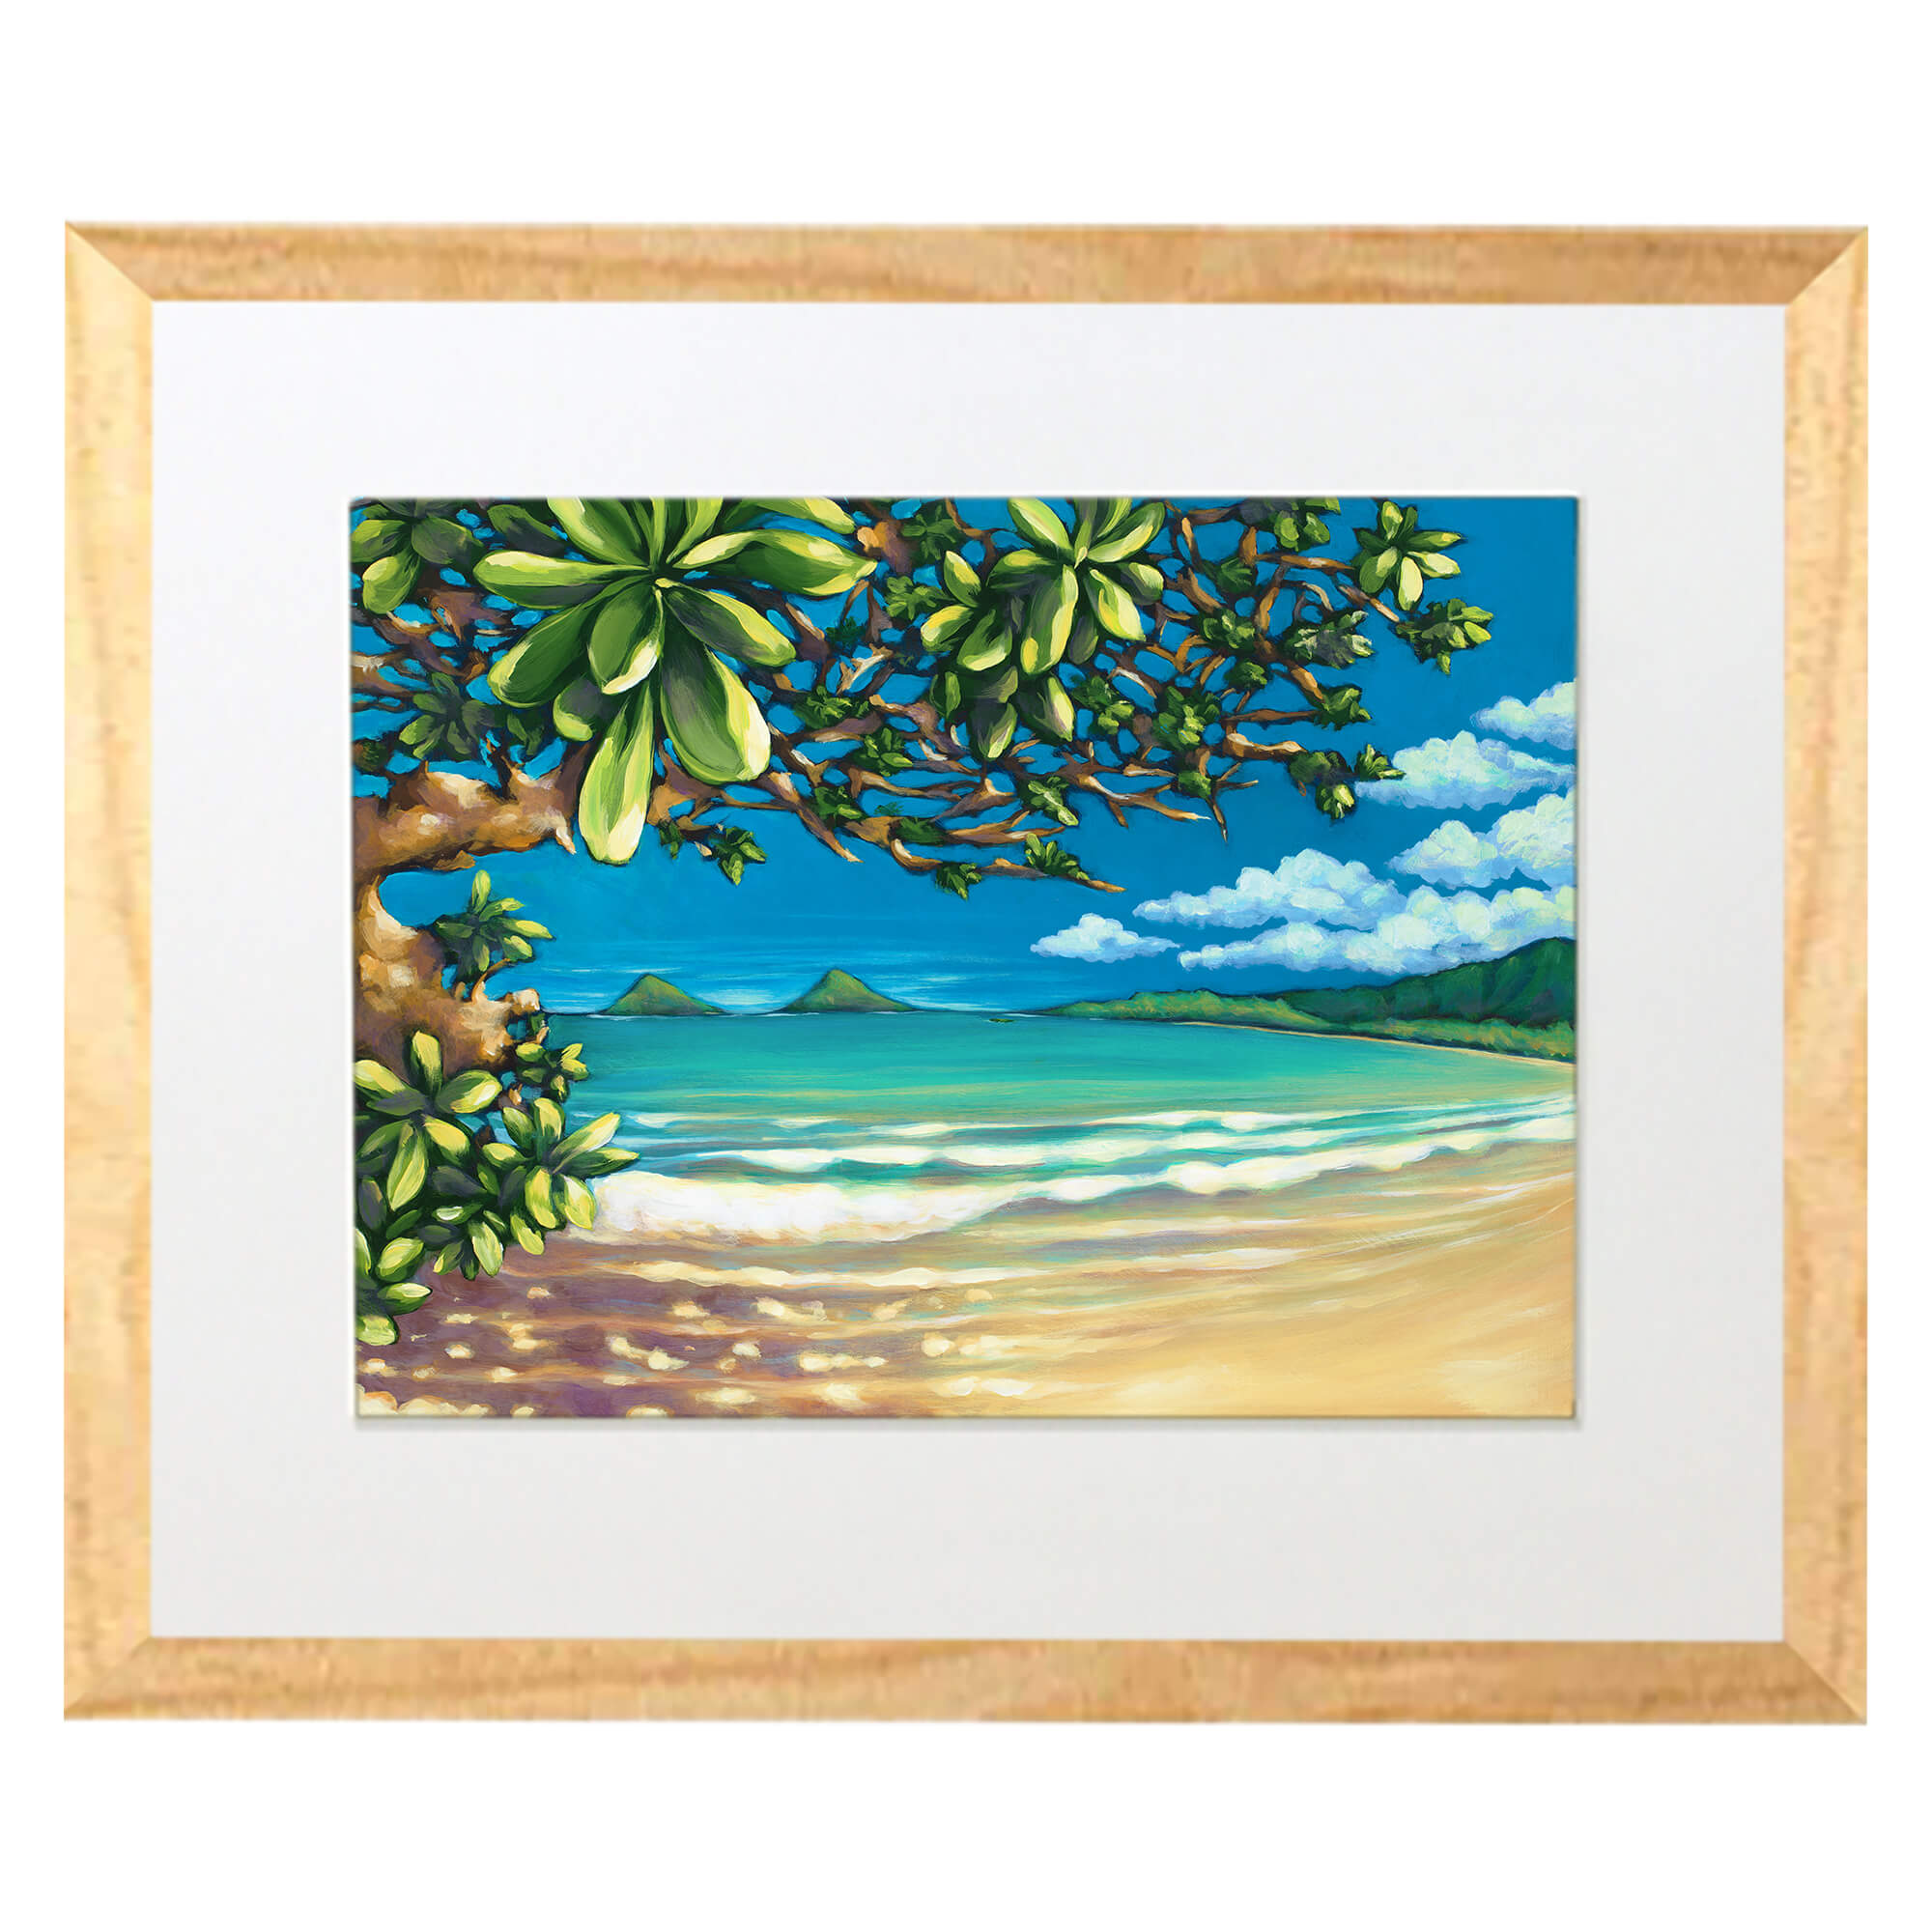 Matted art print with wood frame featuring a mountain  by hawaii artist Kristi Petosa